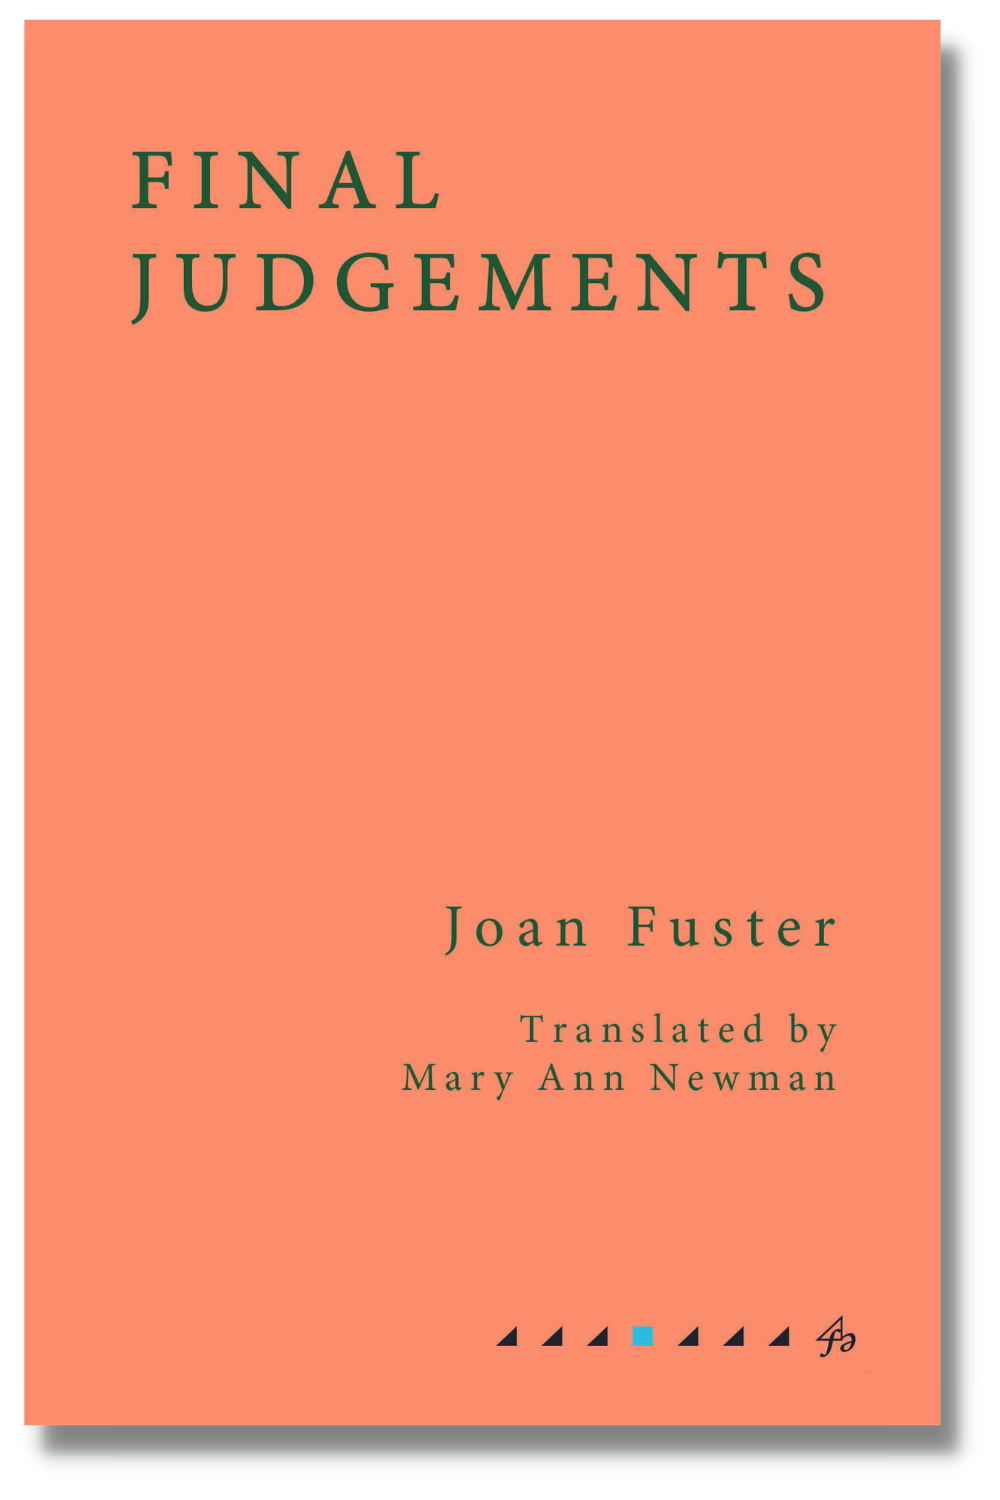 The cover of "Final Judgements"